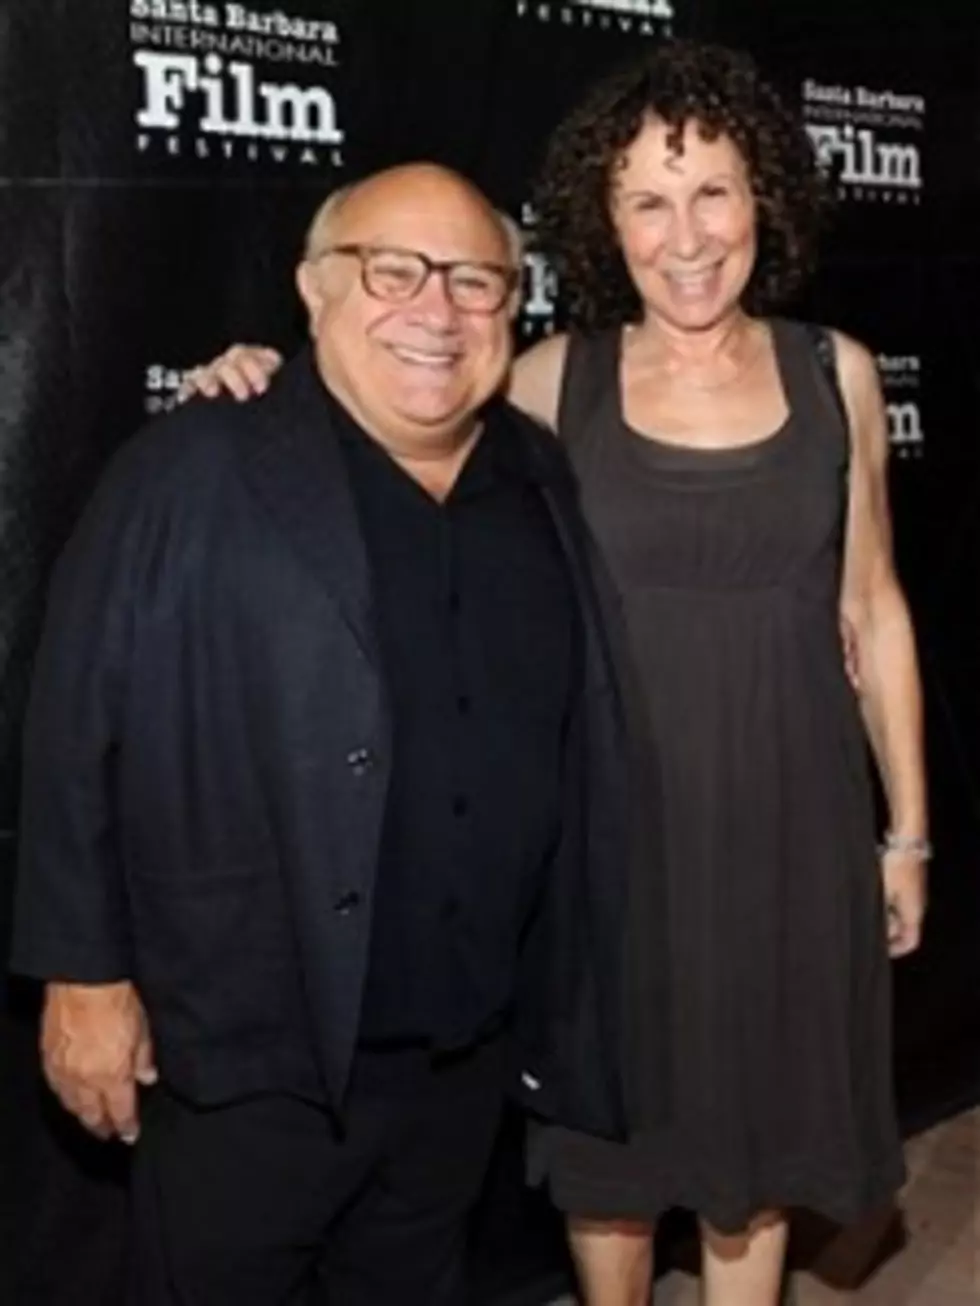 &#8216;Danny DeVito and Rhea Perlman&#8217; Divorce After 30 Years